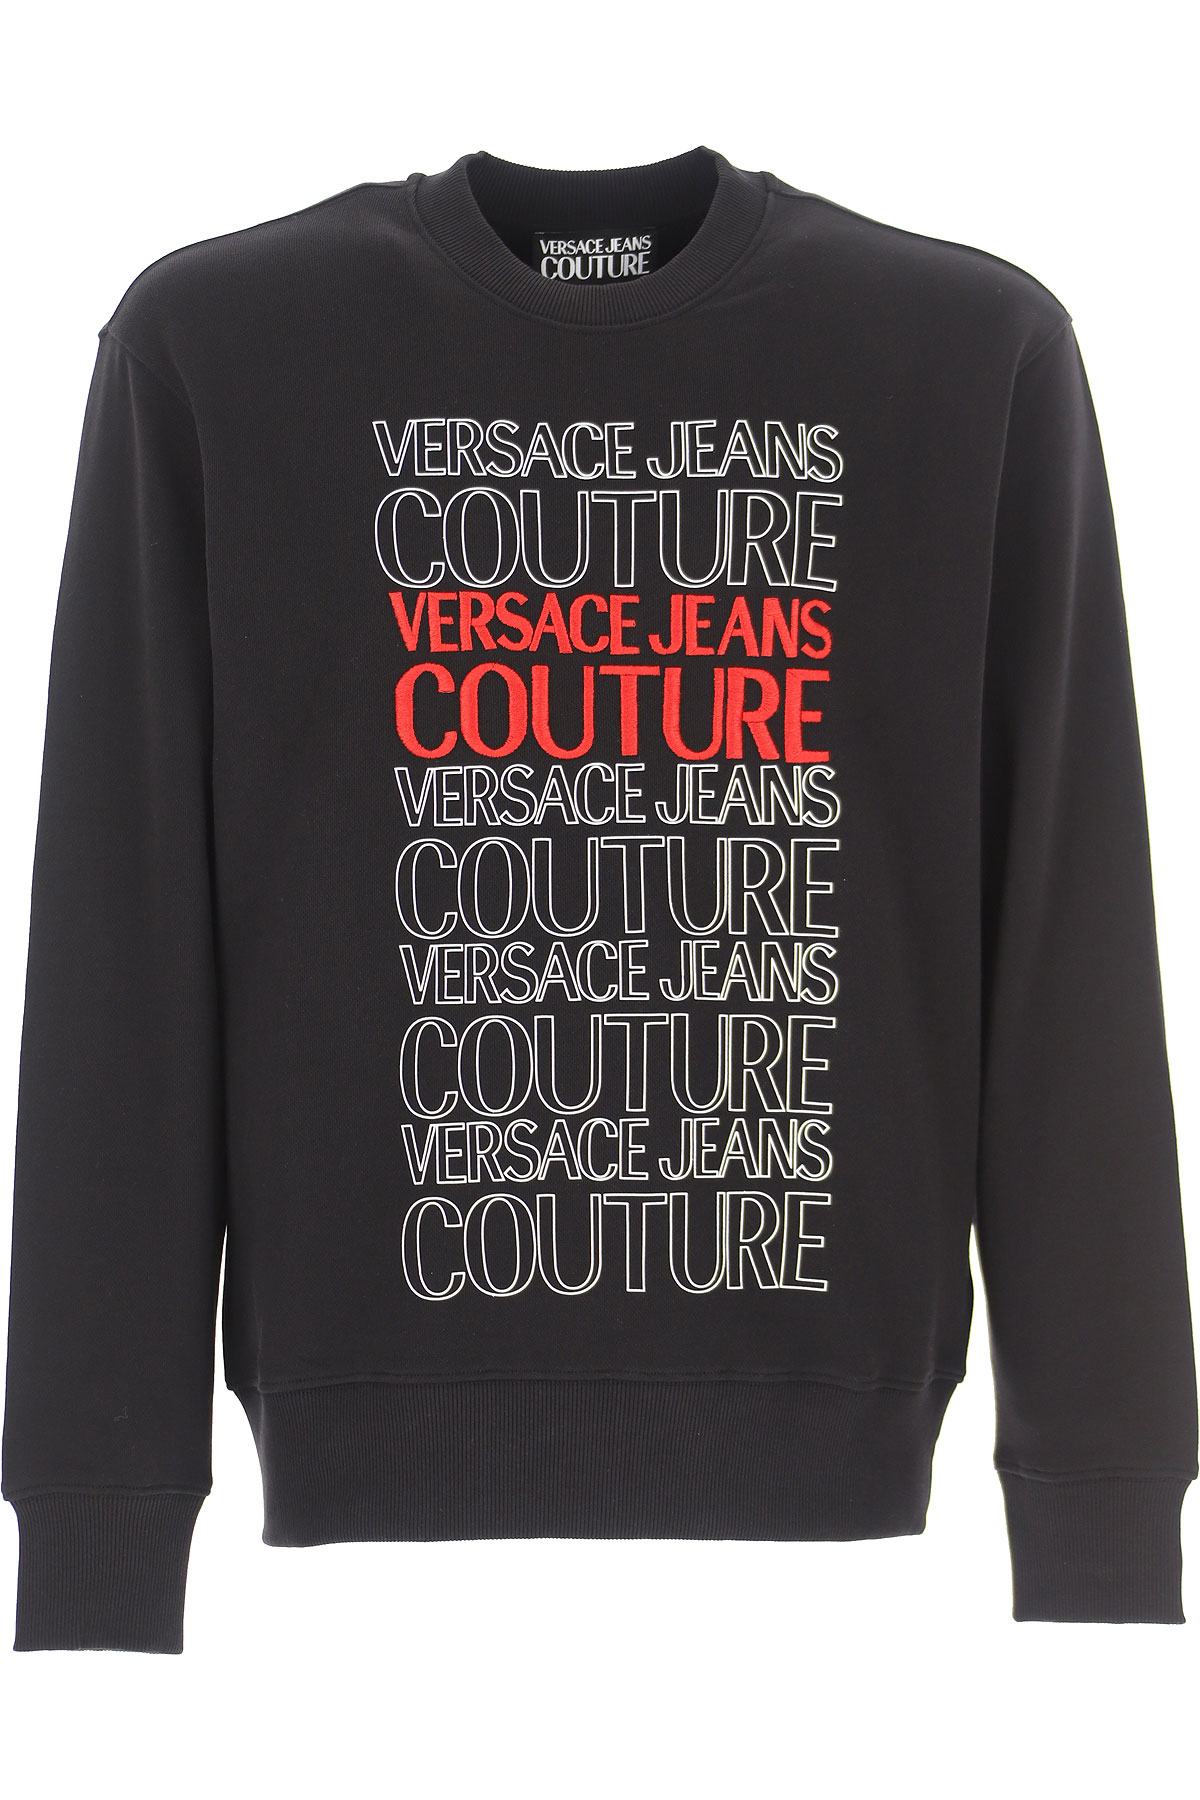 Mens Clothing Versace Jeans Couture , Style code: b7gwa7ut-30453-k42